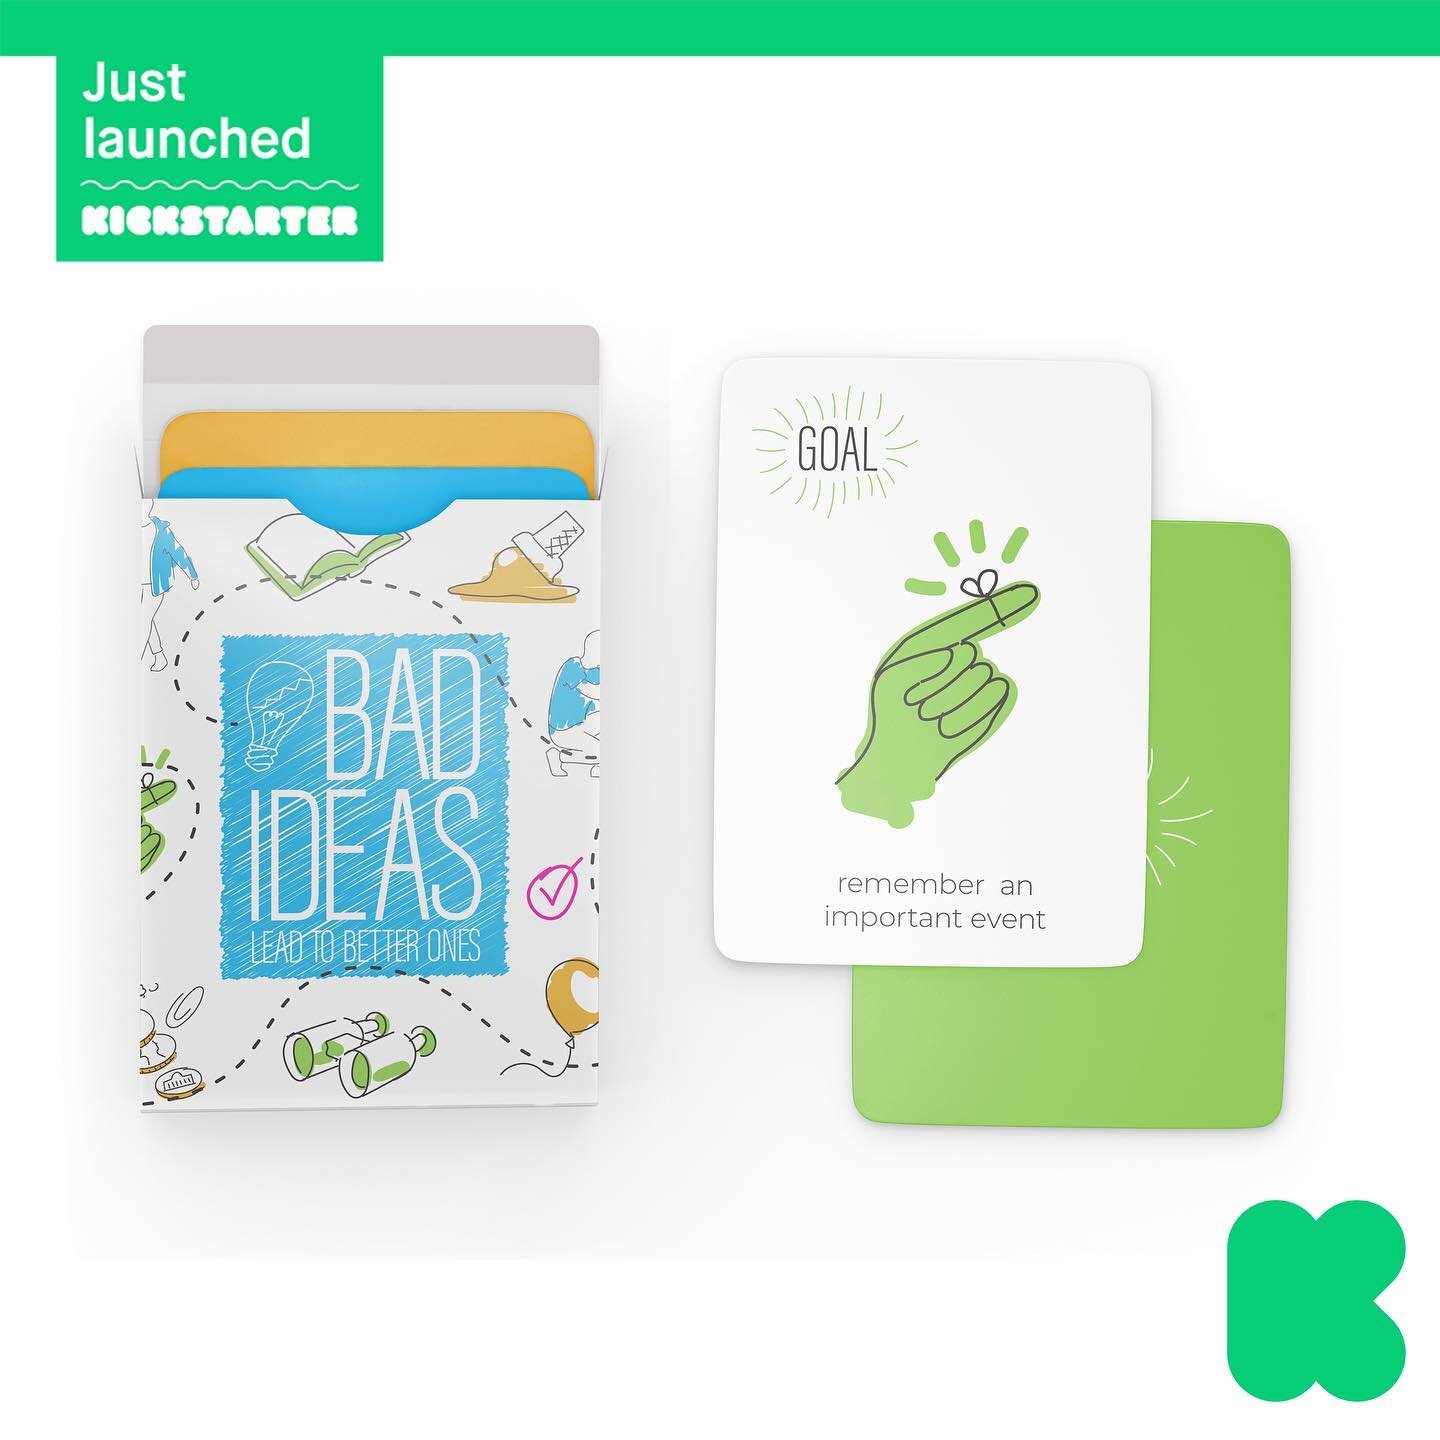 Bad Ideas [lead to better ones] just launched on Kickstarter! The game all about creative thinking is a fun way to learn through play. The first 100 decks are 20% off so act fast! Follow the link in our bio to learn more. 
#kickstarter #cardgame #des